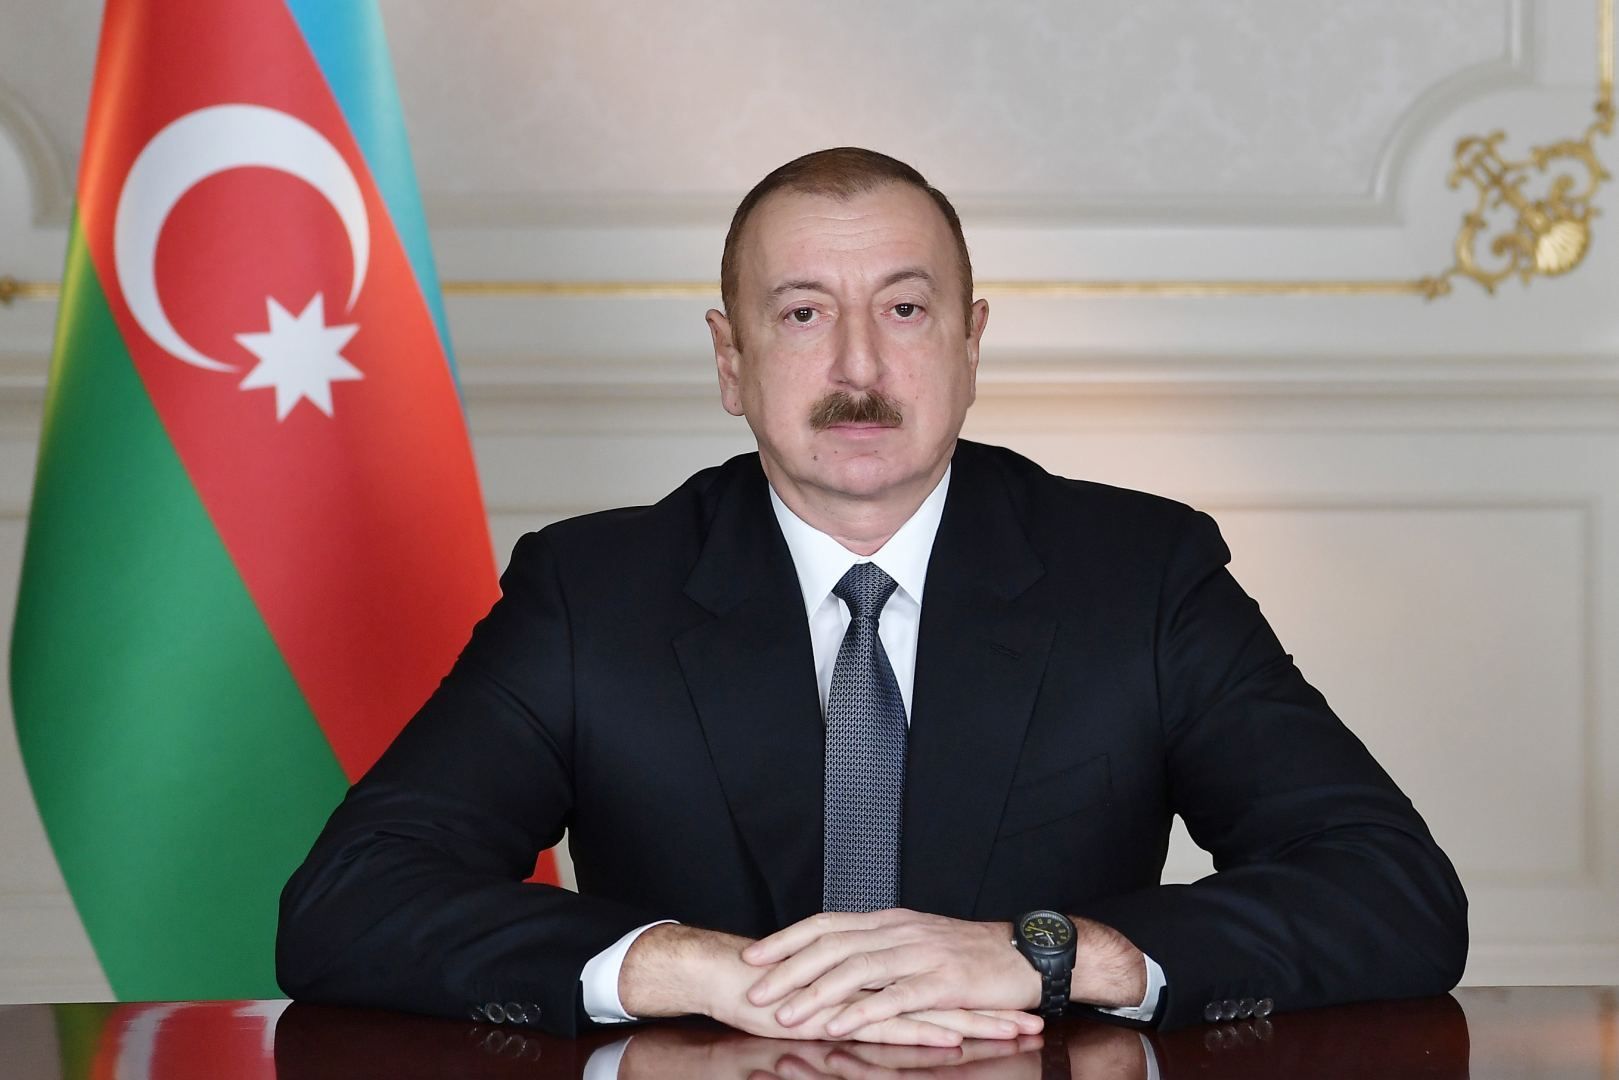 President Ilham Aliyev introduces amendments to law “On conscription and military service”